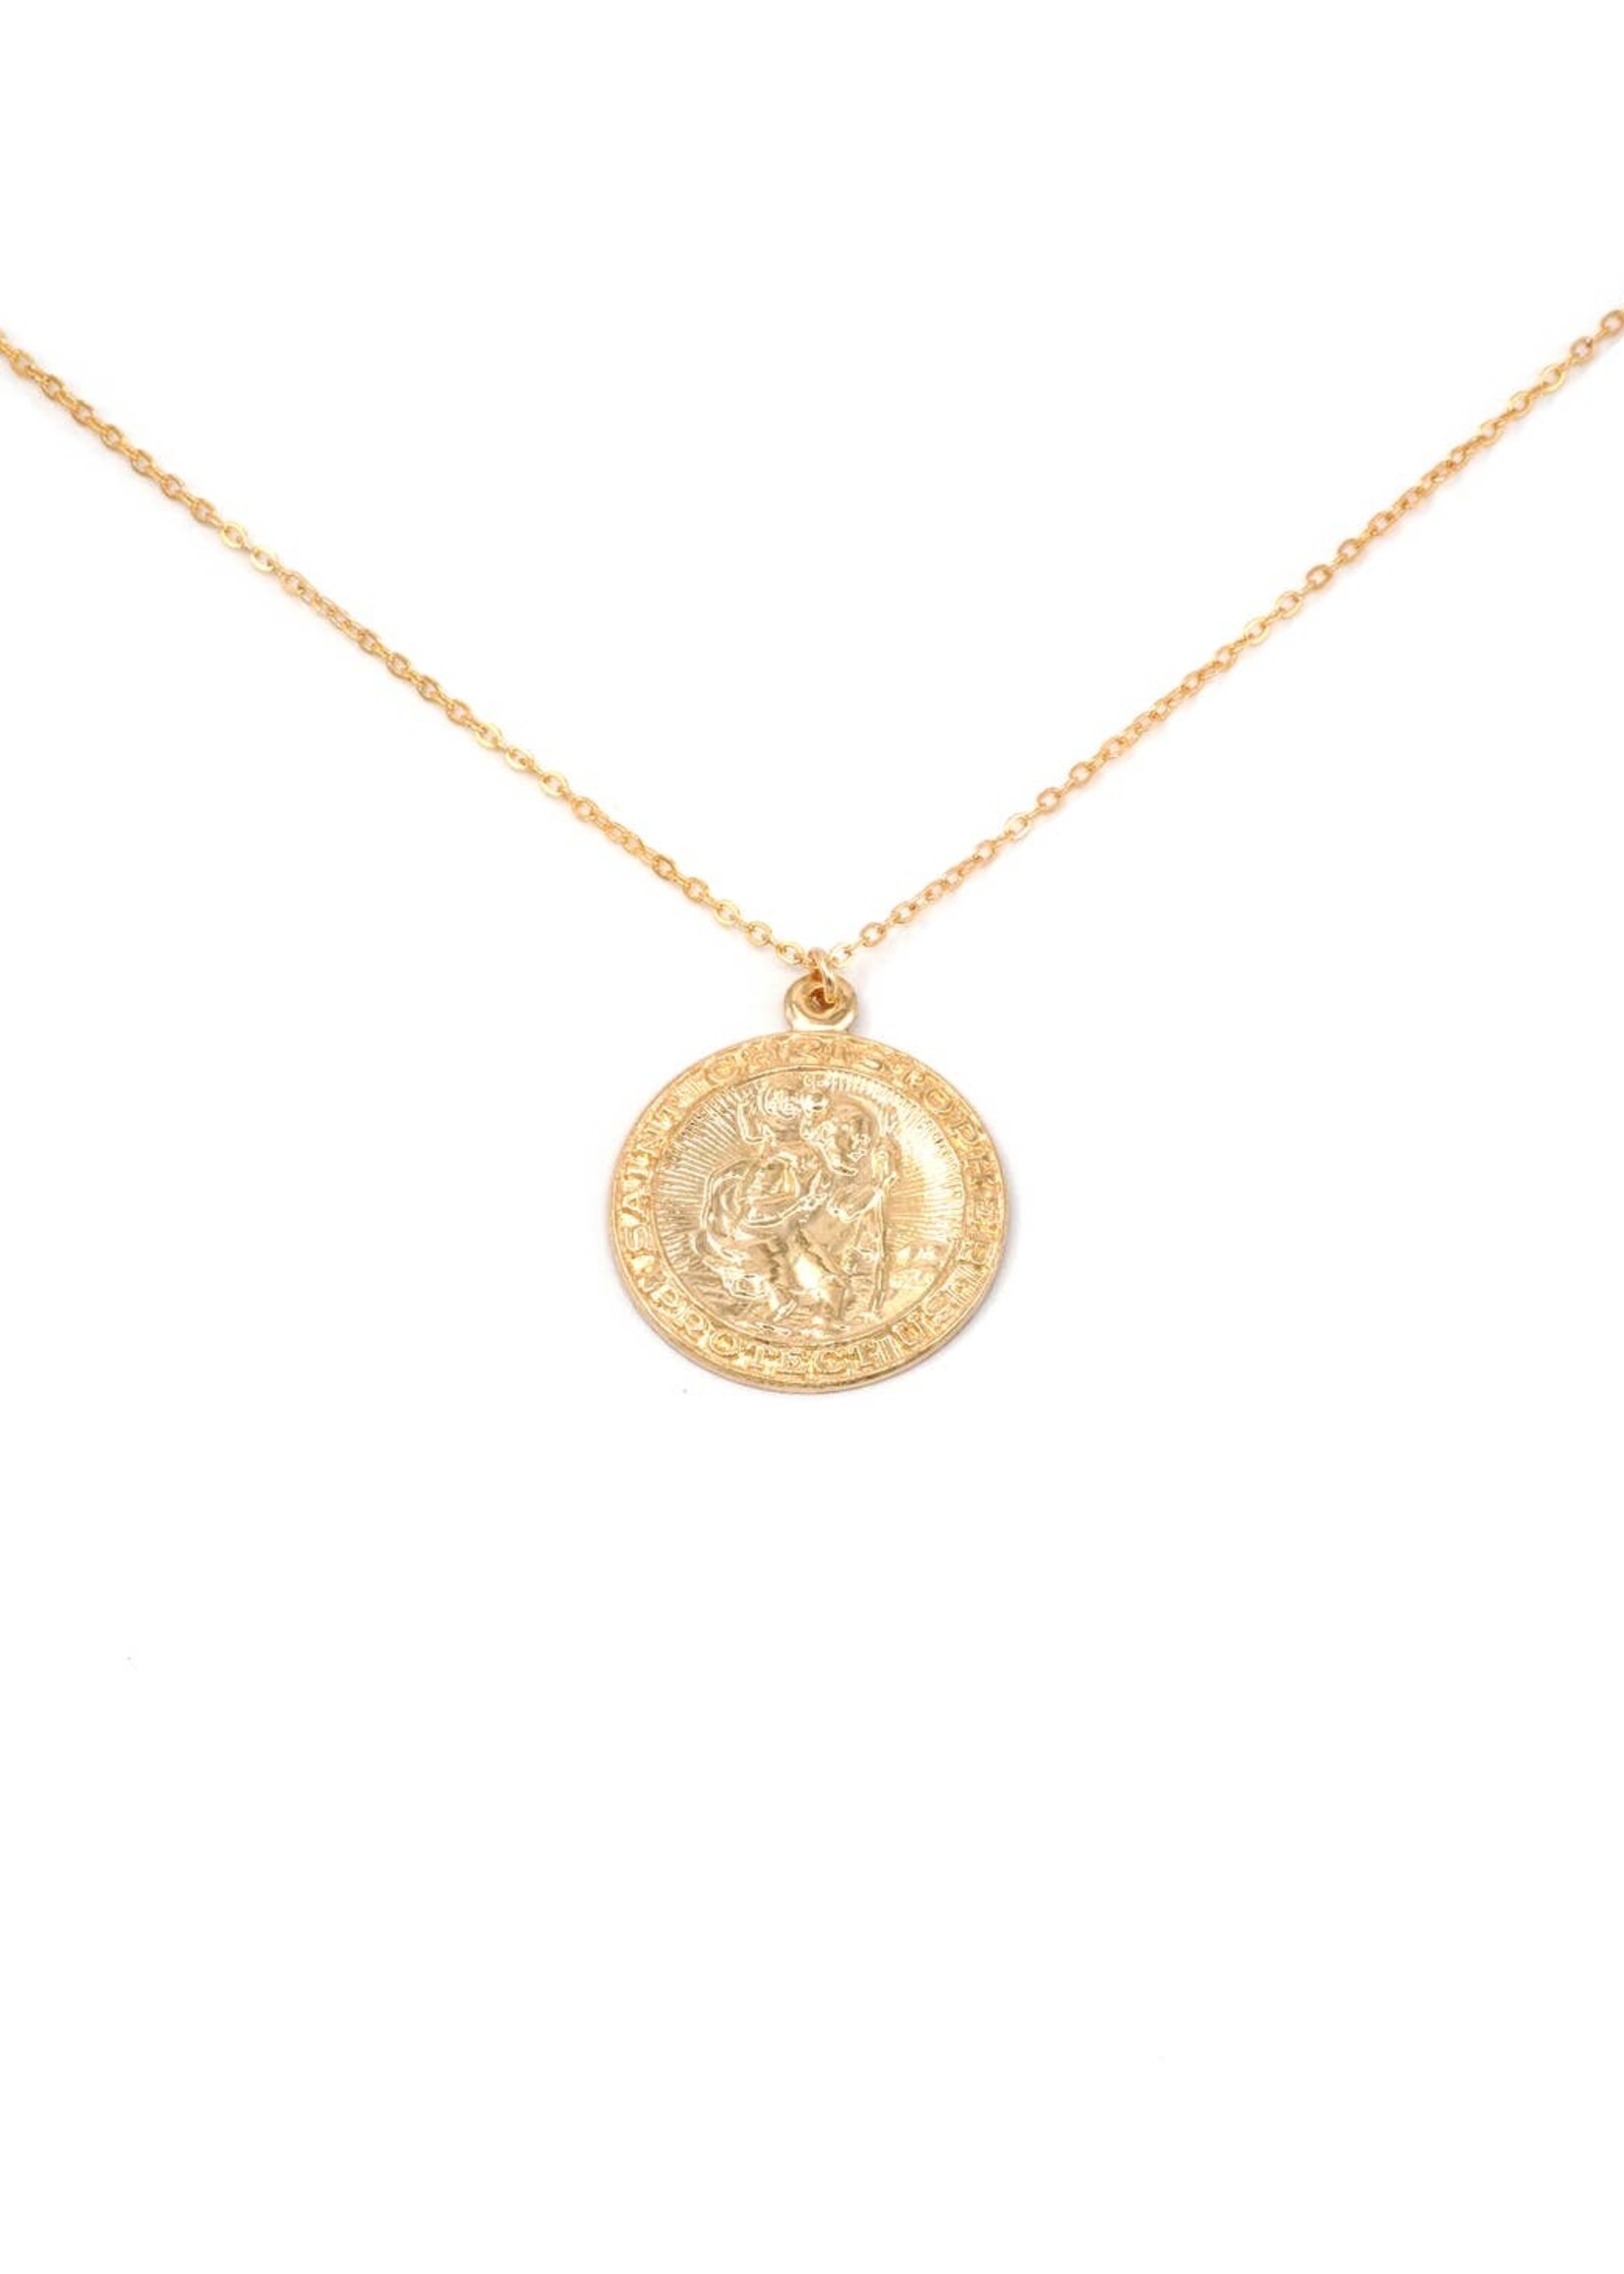 May Martin Saint Christopher Coin Necklace Gold Filled 18"